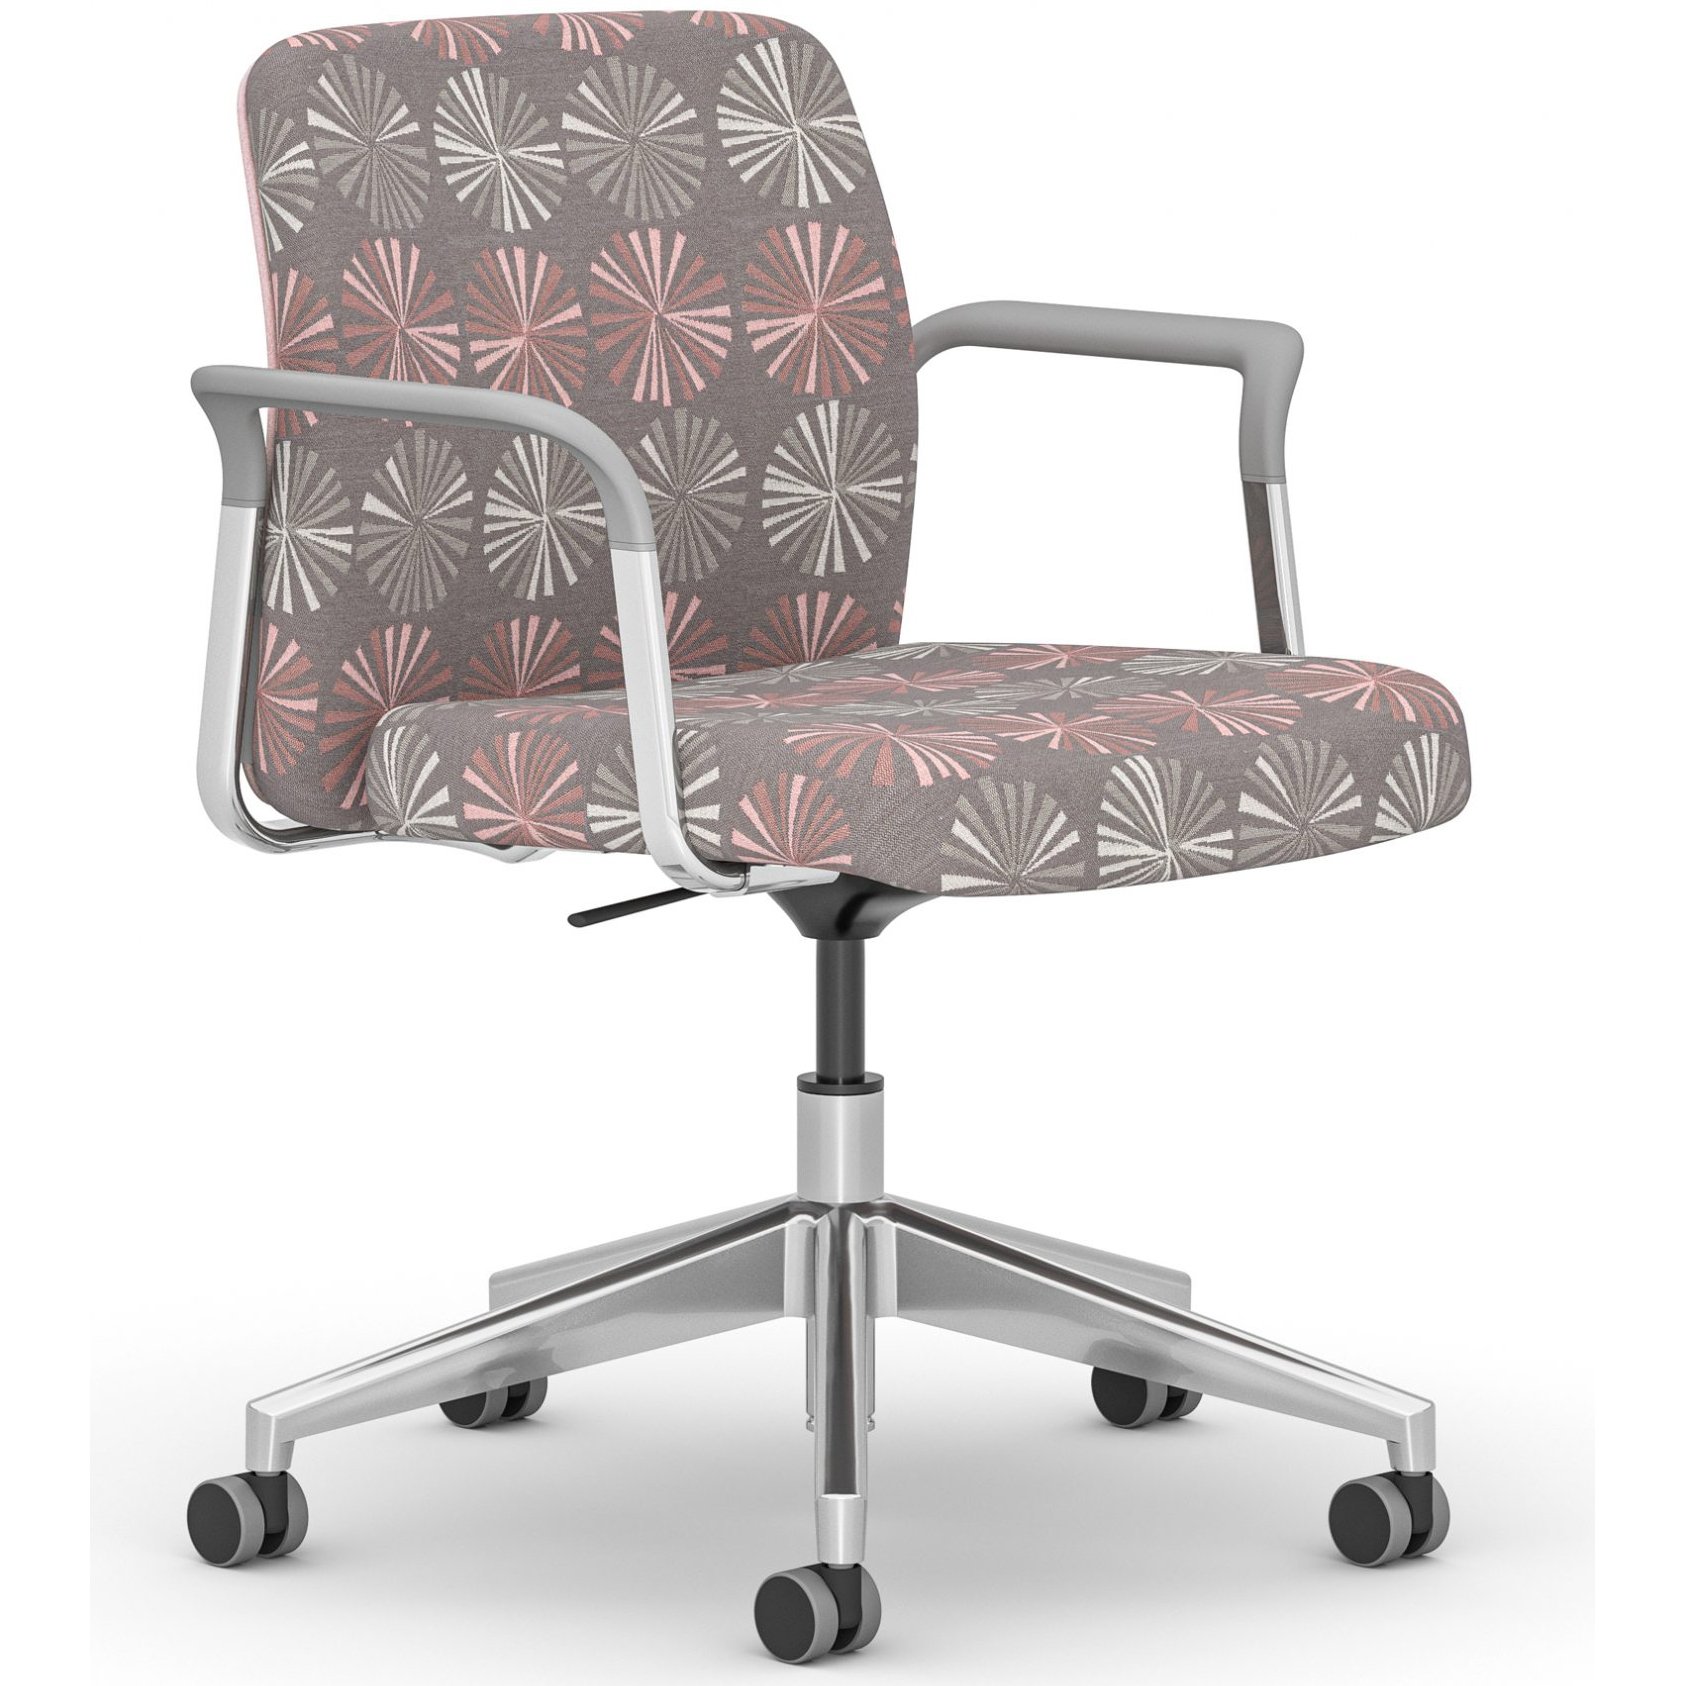 Office Master GY4T Ginny Multi-Tasker Chair